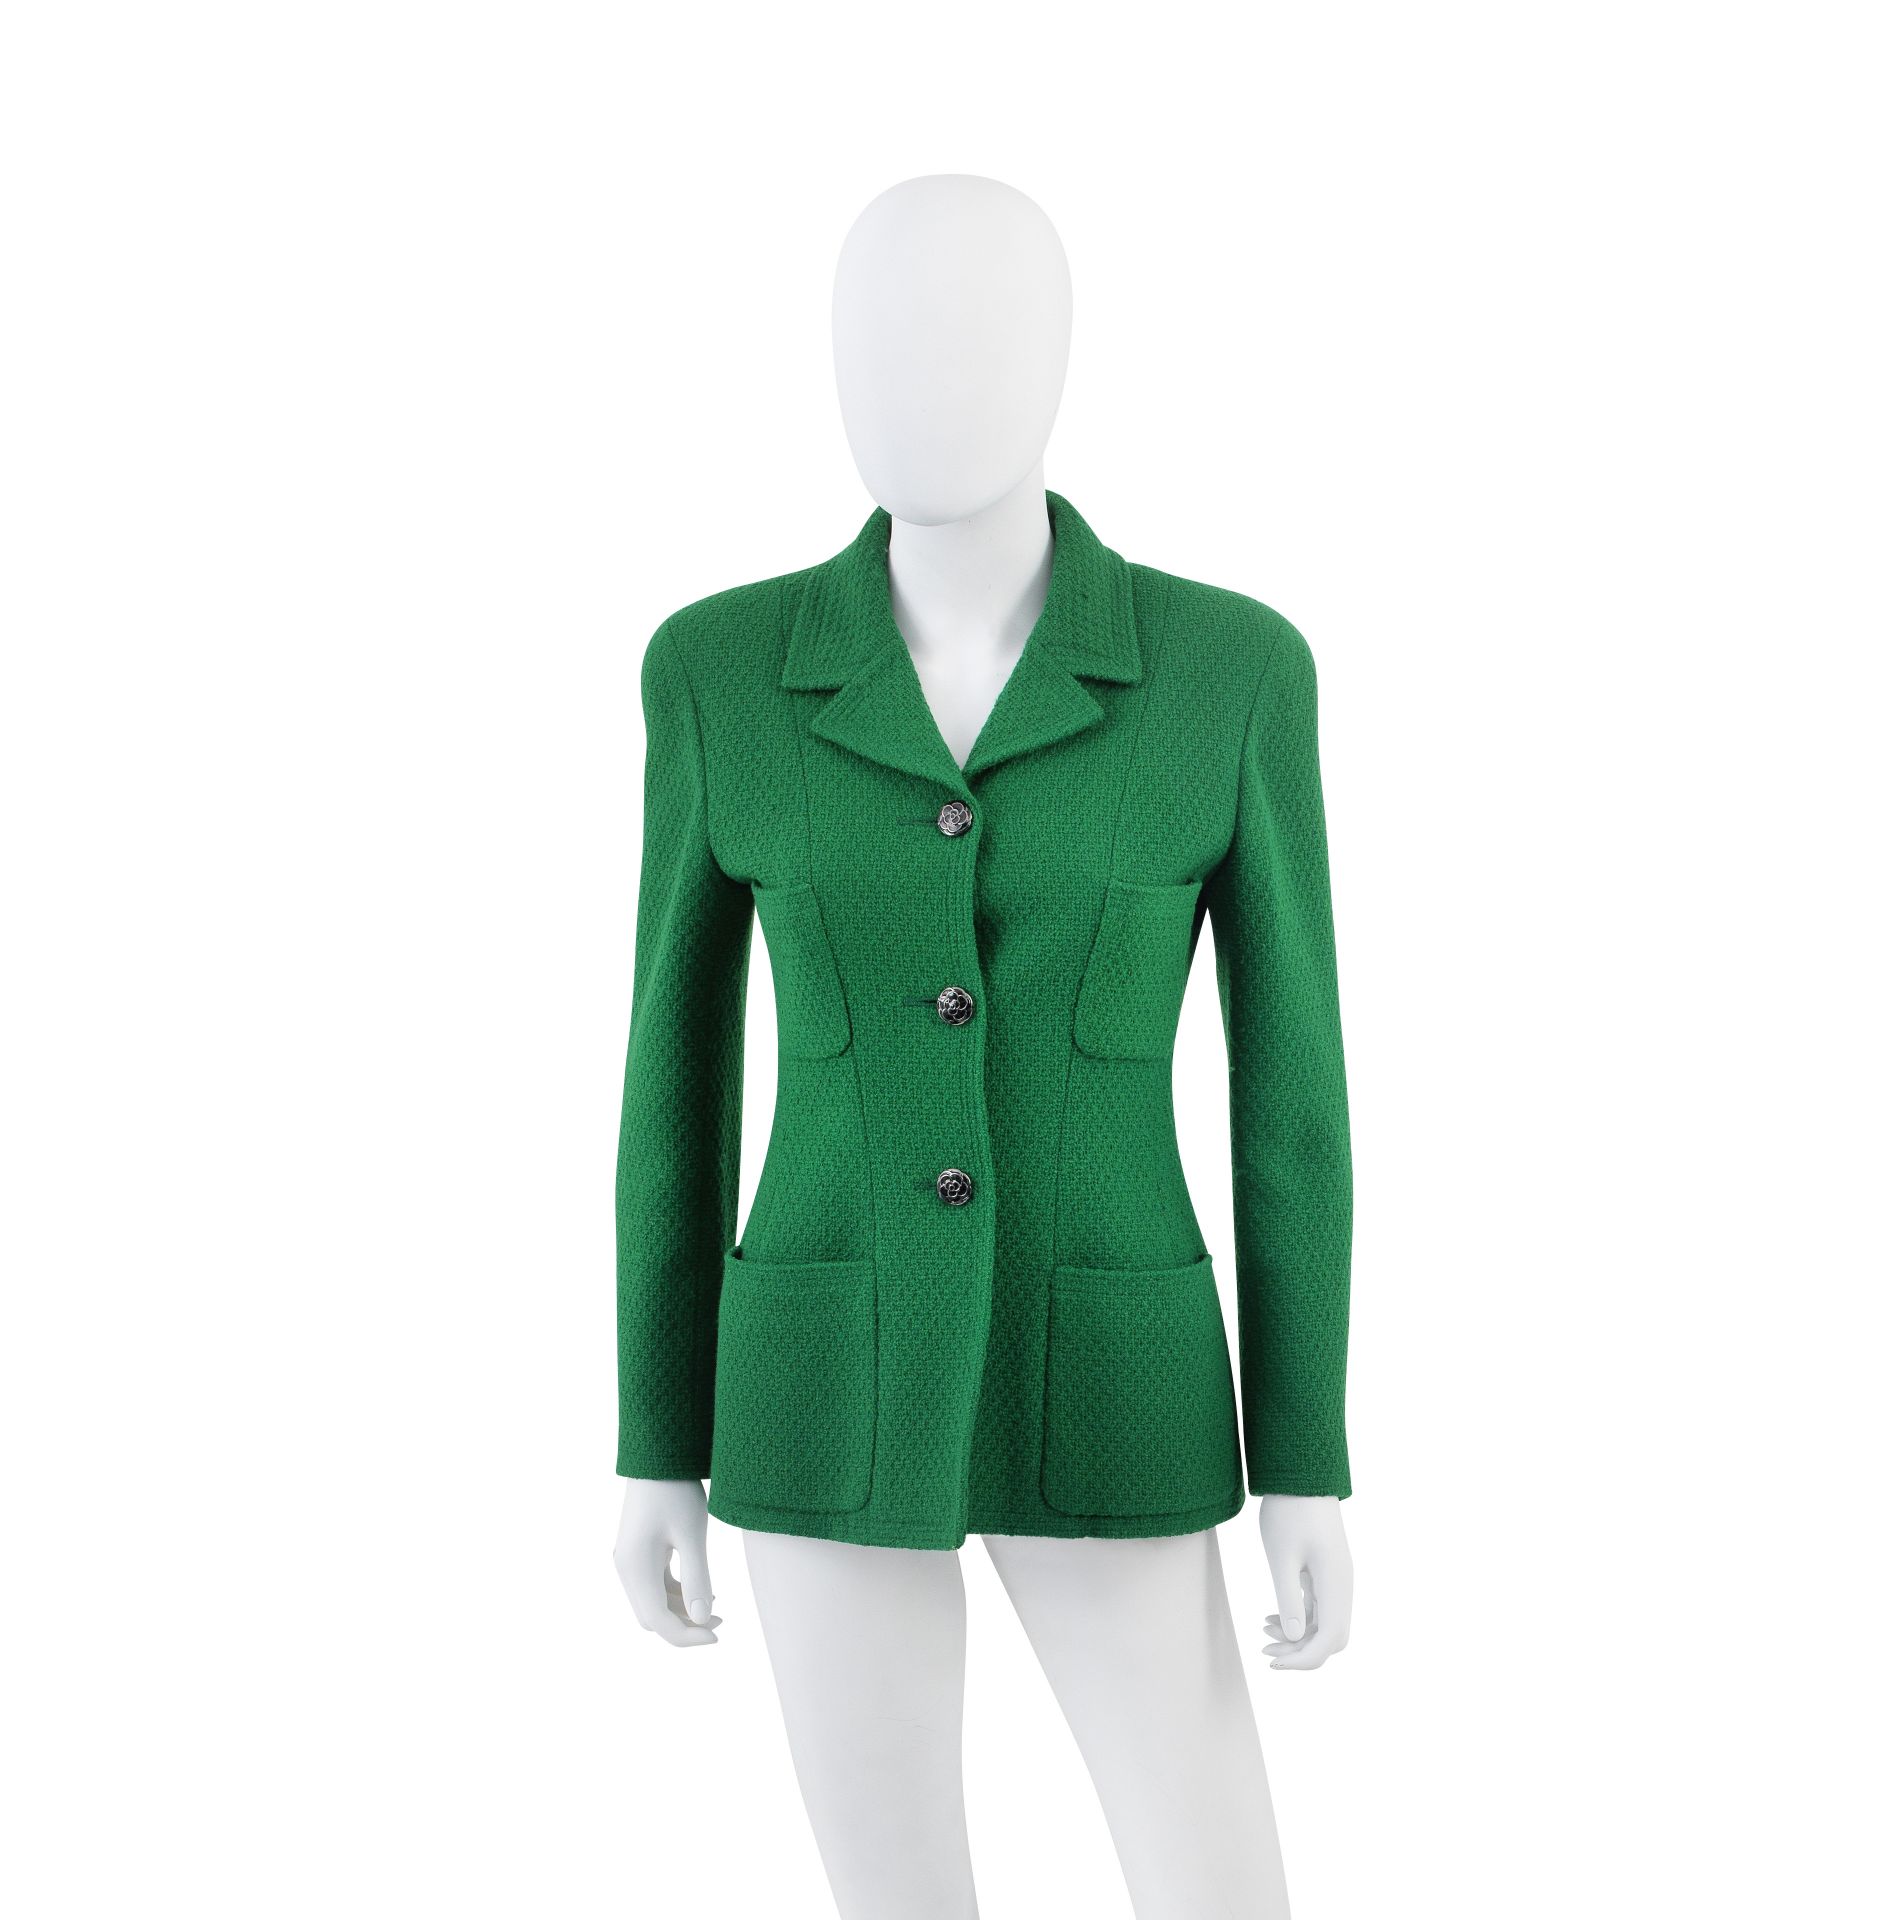 Green Boucle Jacket, Chanel, early 1990s collection 29, (Includes a set of the original gilt bas...